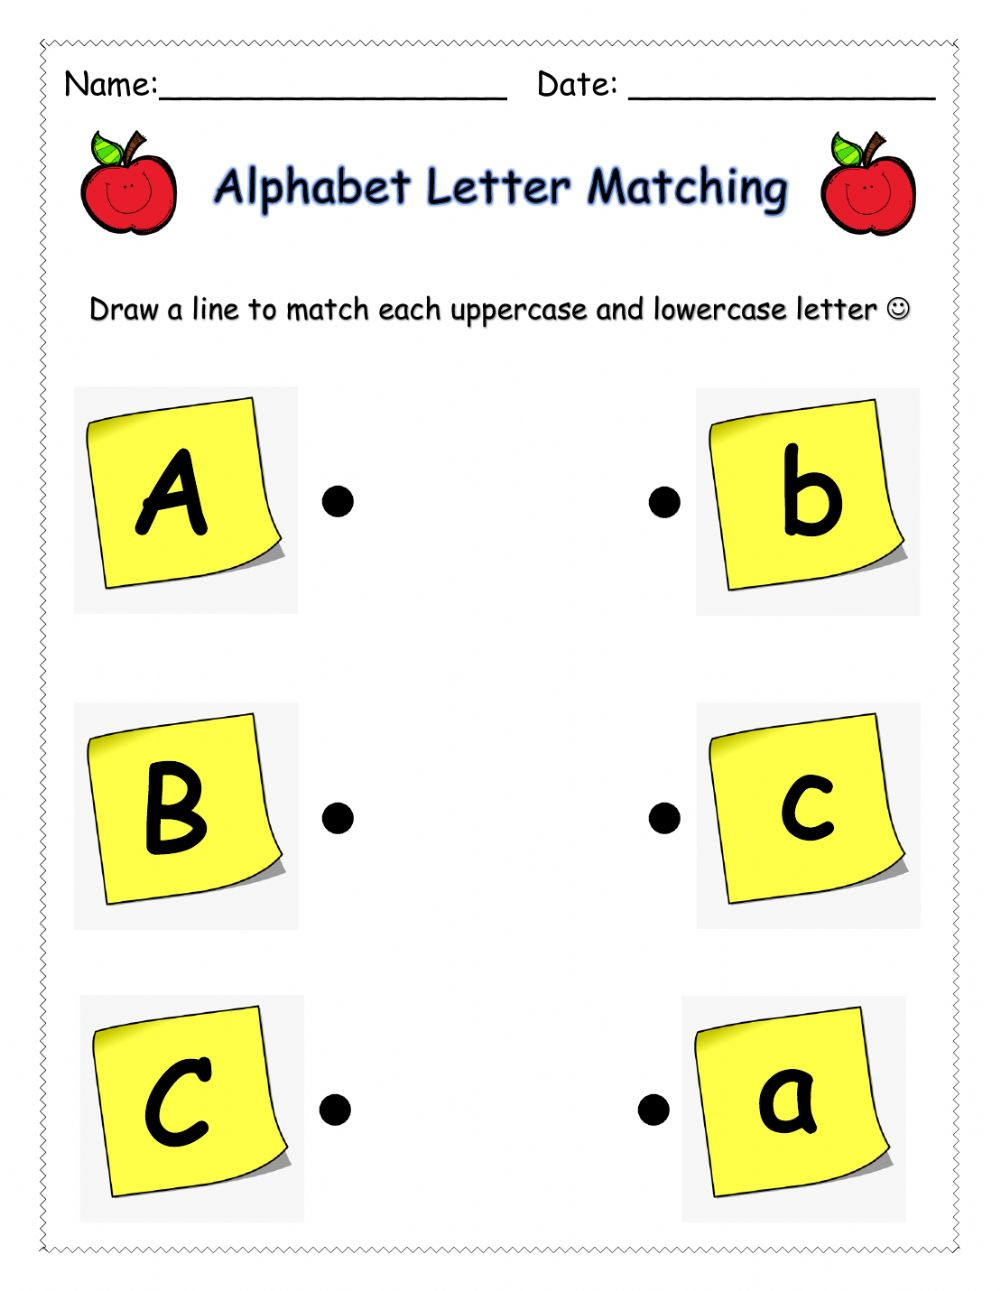 Letter Matching (Abc) Worksheet